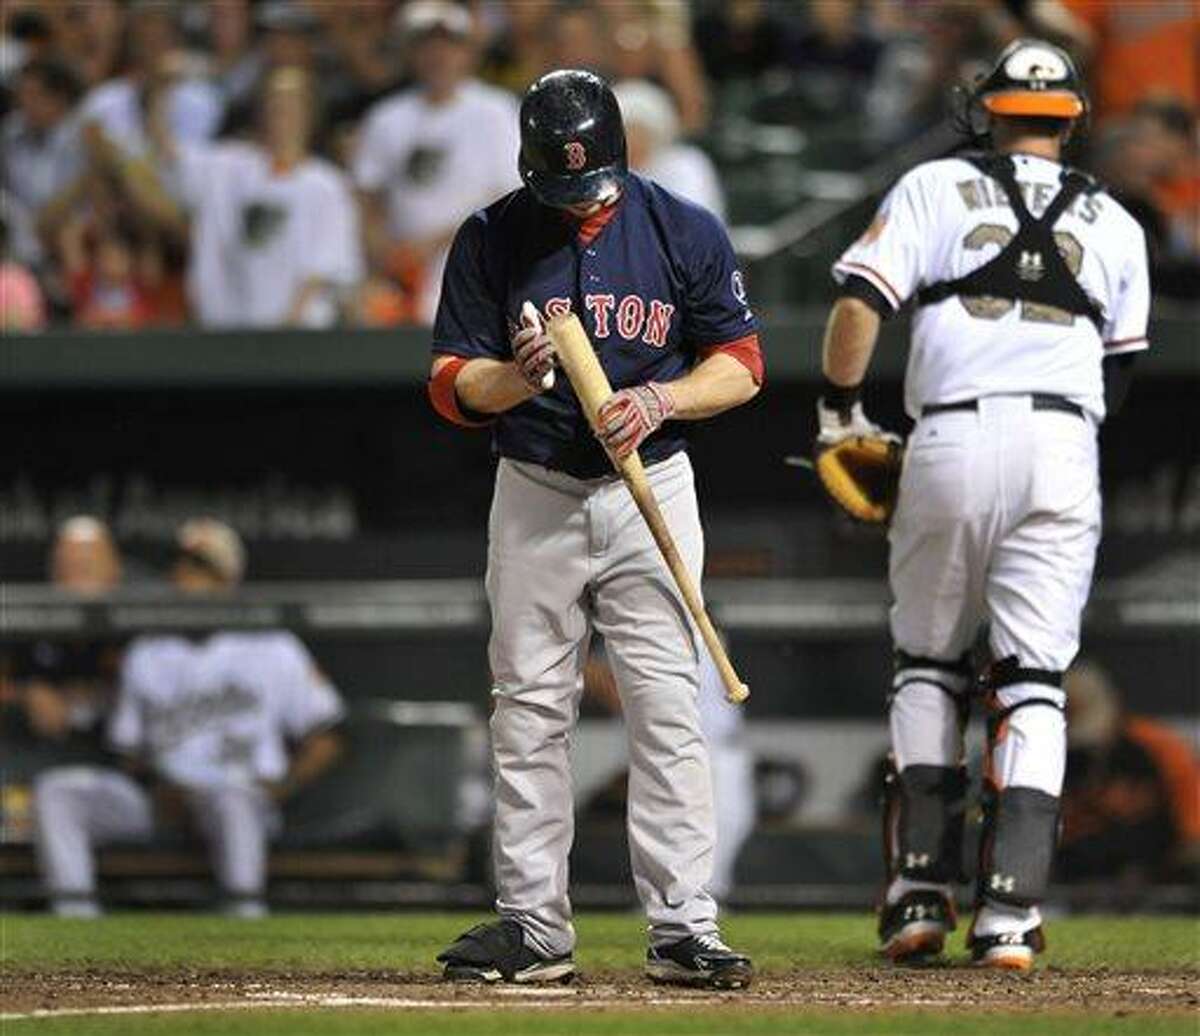 Boston Red Sox's Daniel Nava reacts after striking out against the Baltimore Orioles in the sixth inning of a baseball game, Friday, June 14, 2013, in Baltimore. The Orioles won 2-0. (AP Photo/Gail Burton)